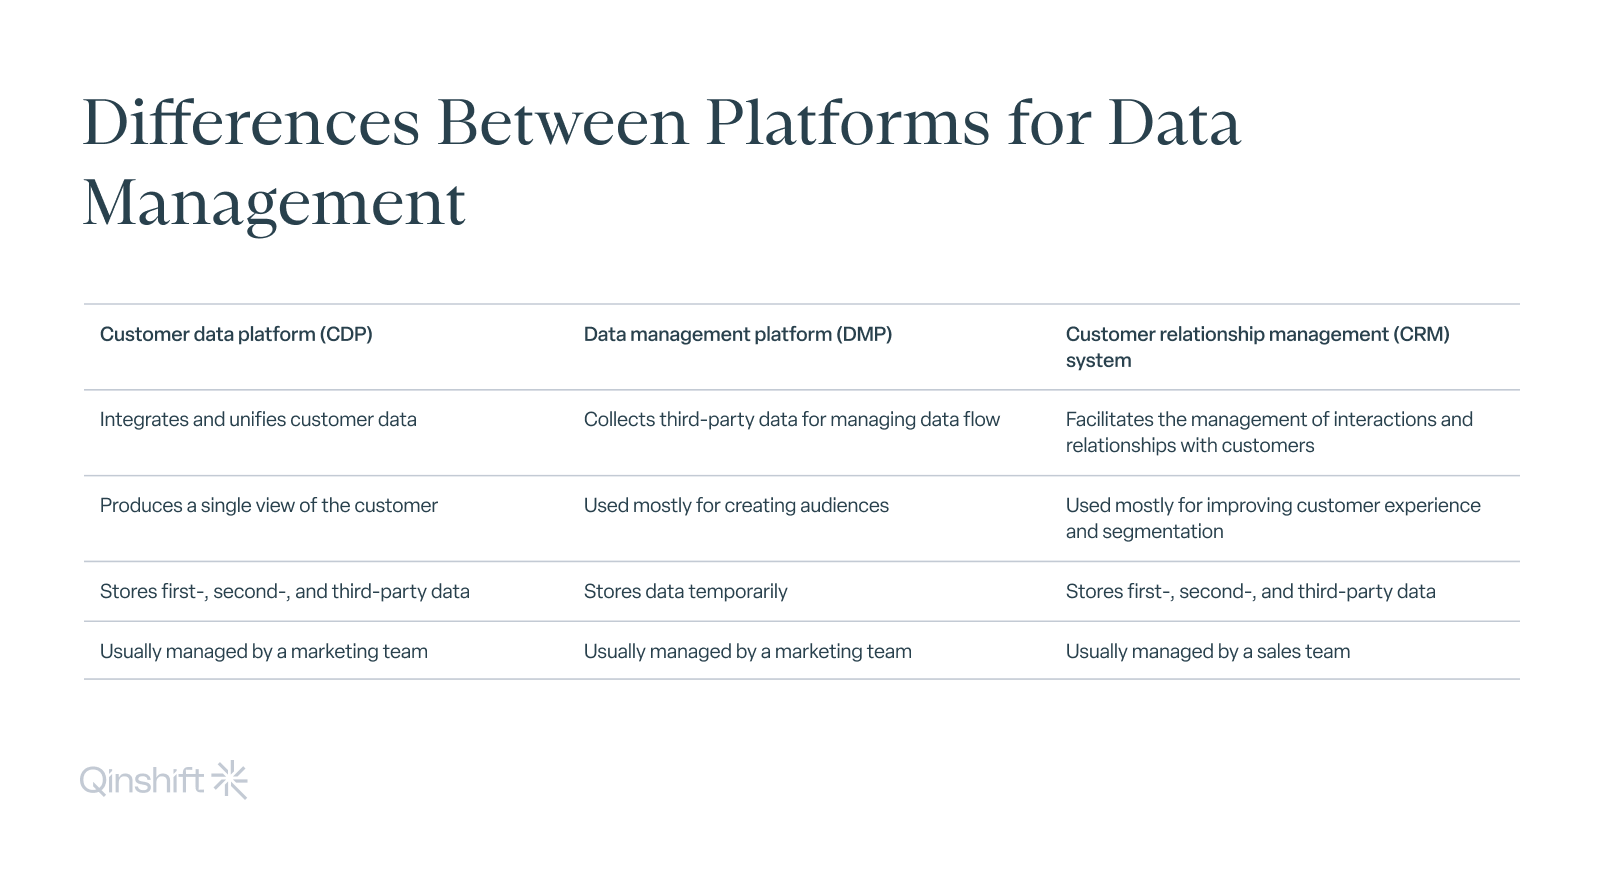 Difference Between Various Platforms for Data Management